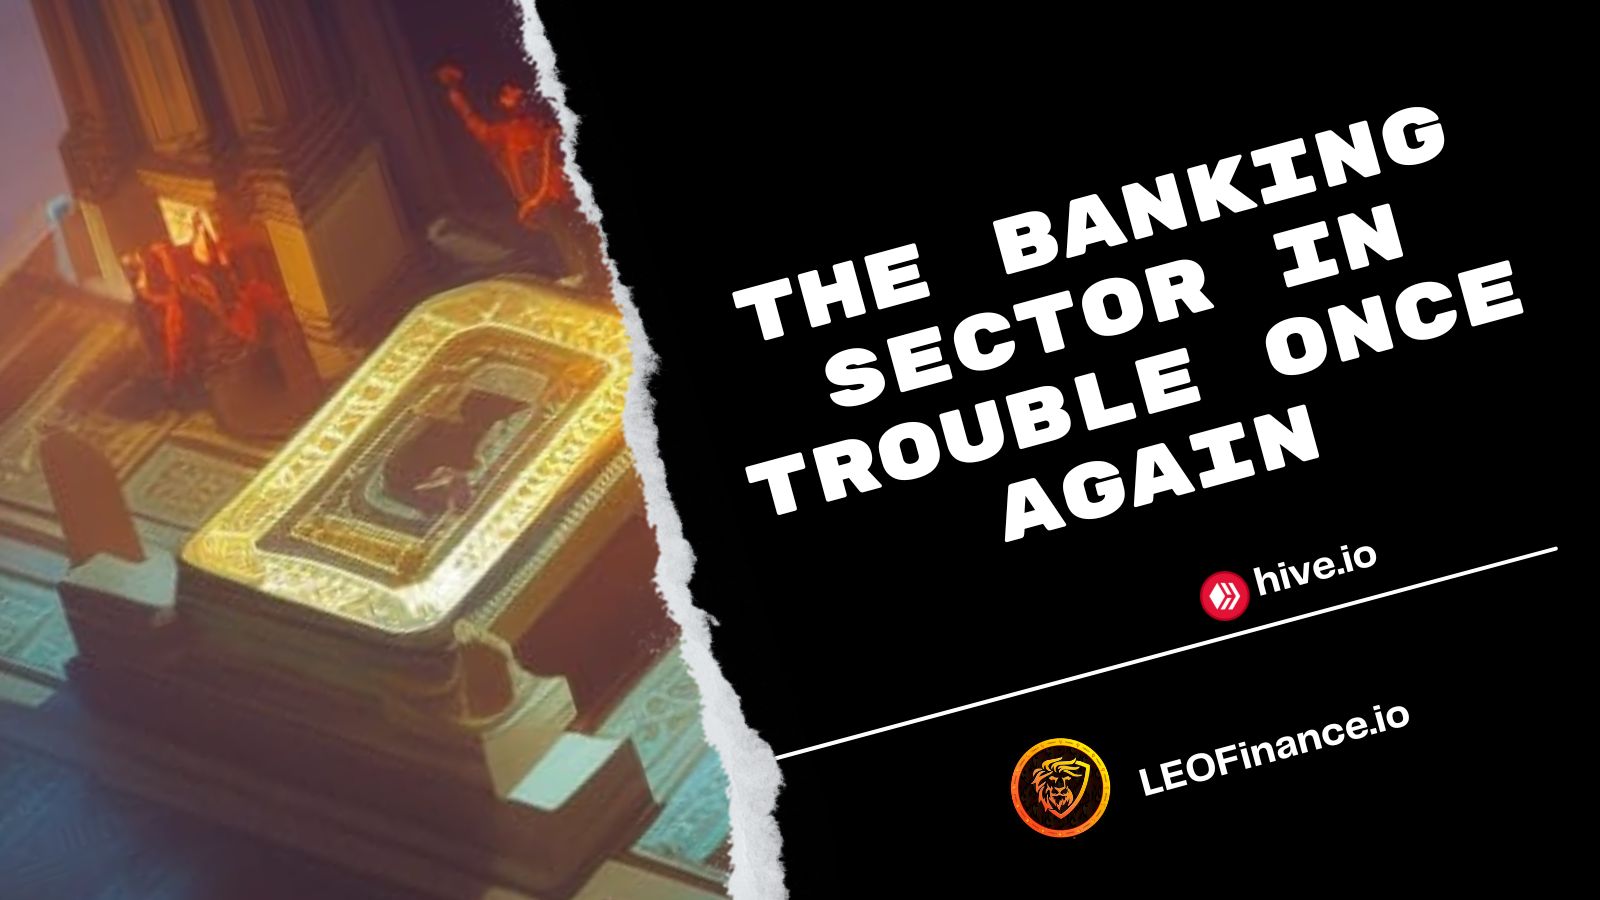 @bitcoinflood/the-banking-sector-in-trouble-once-again